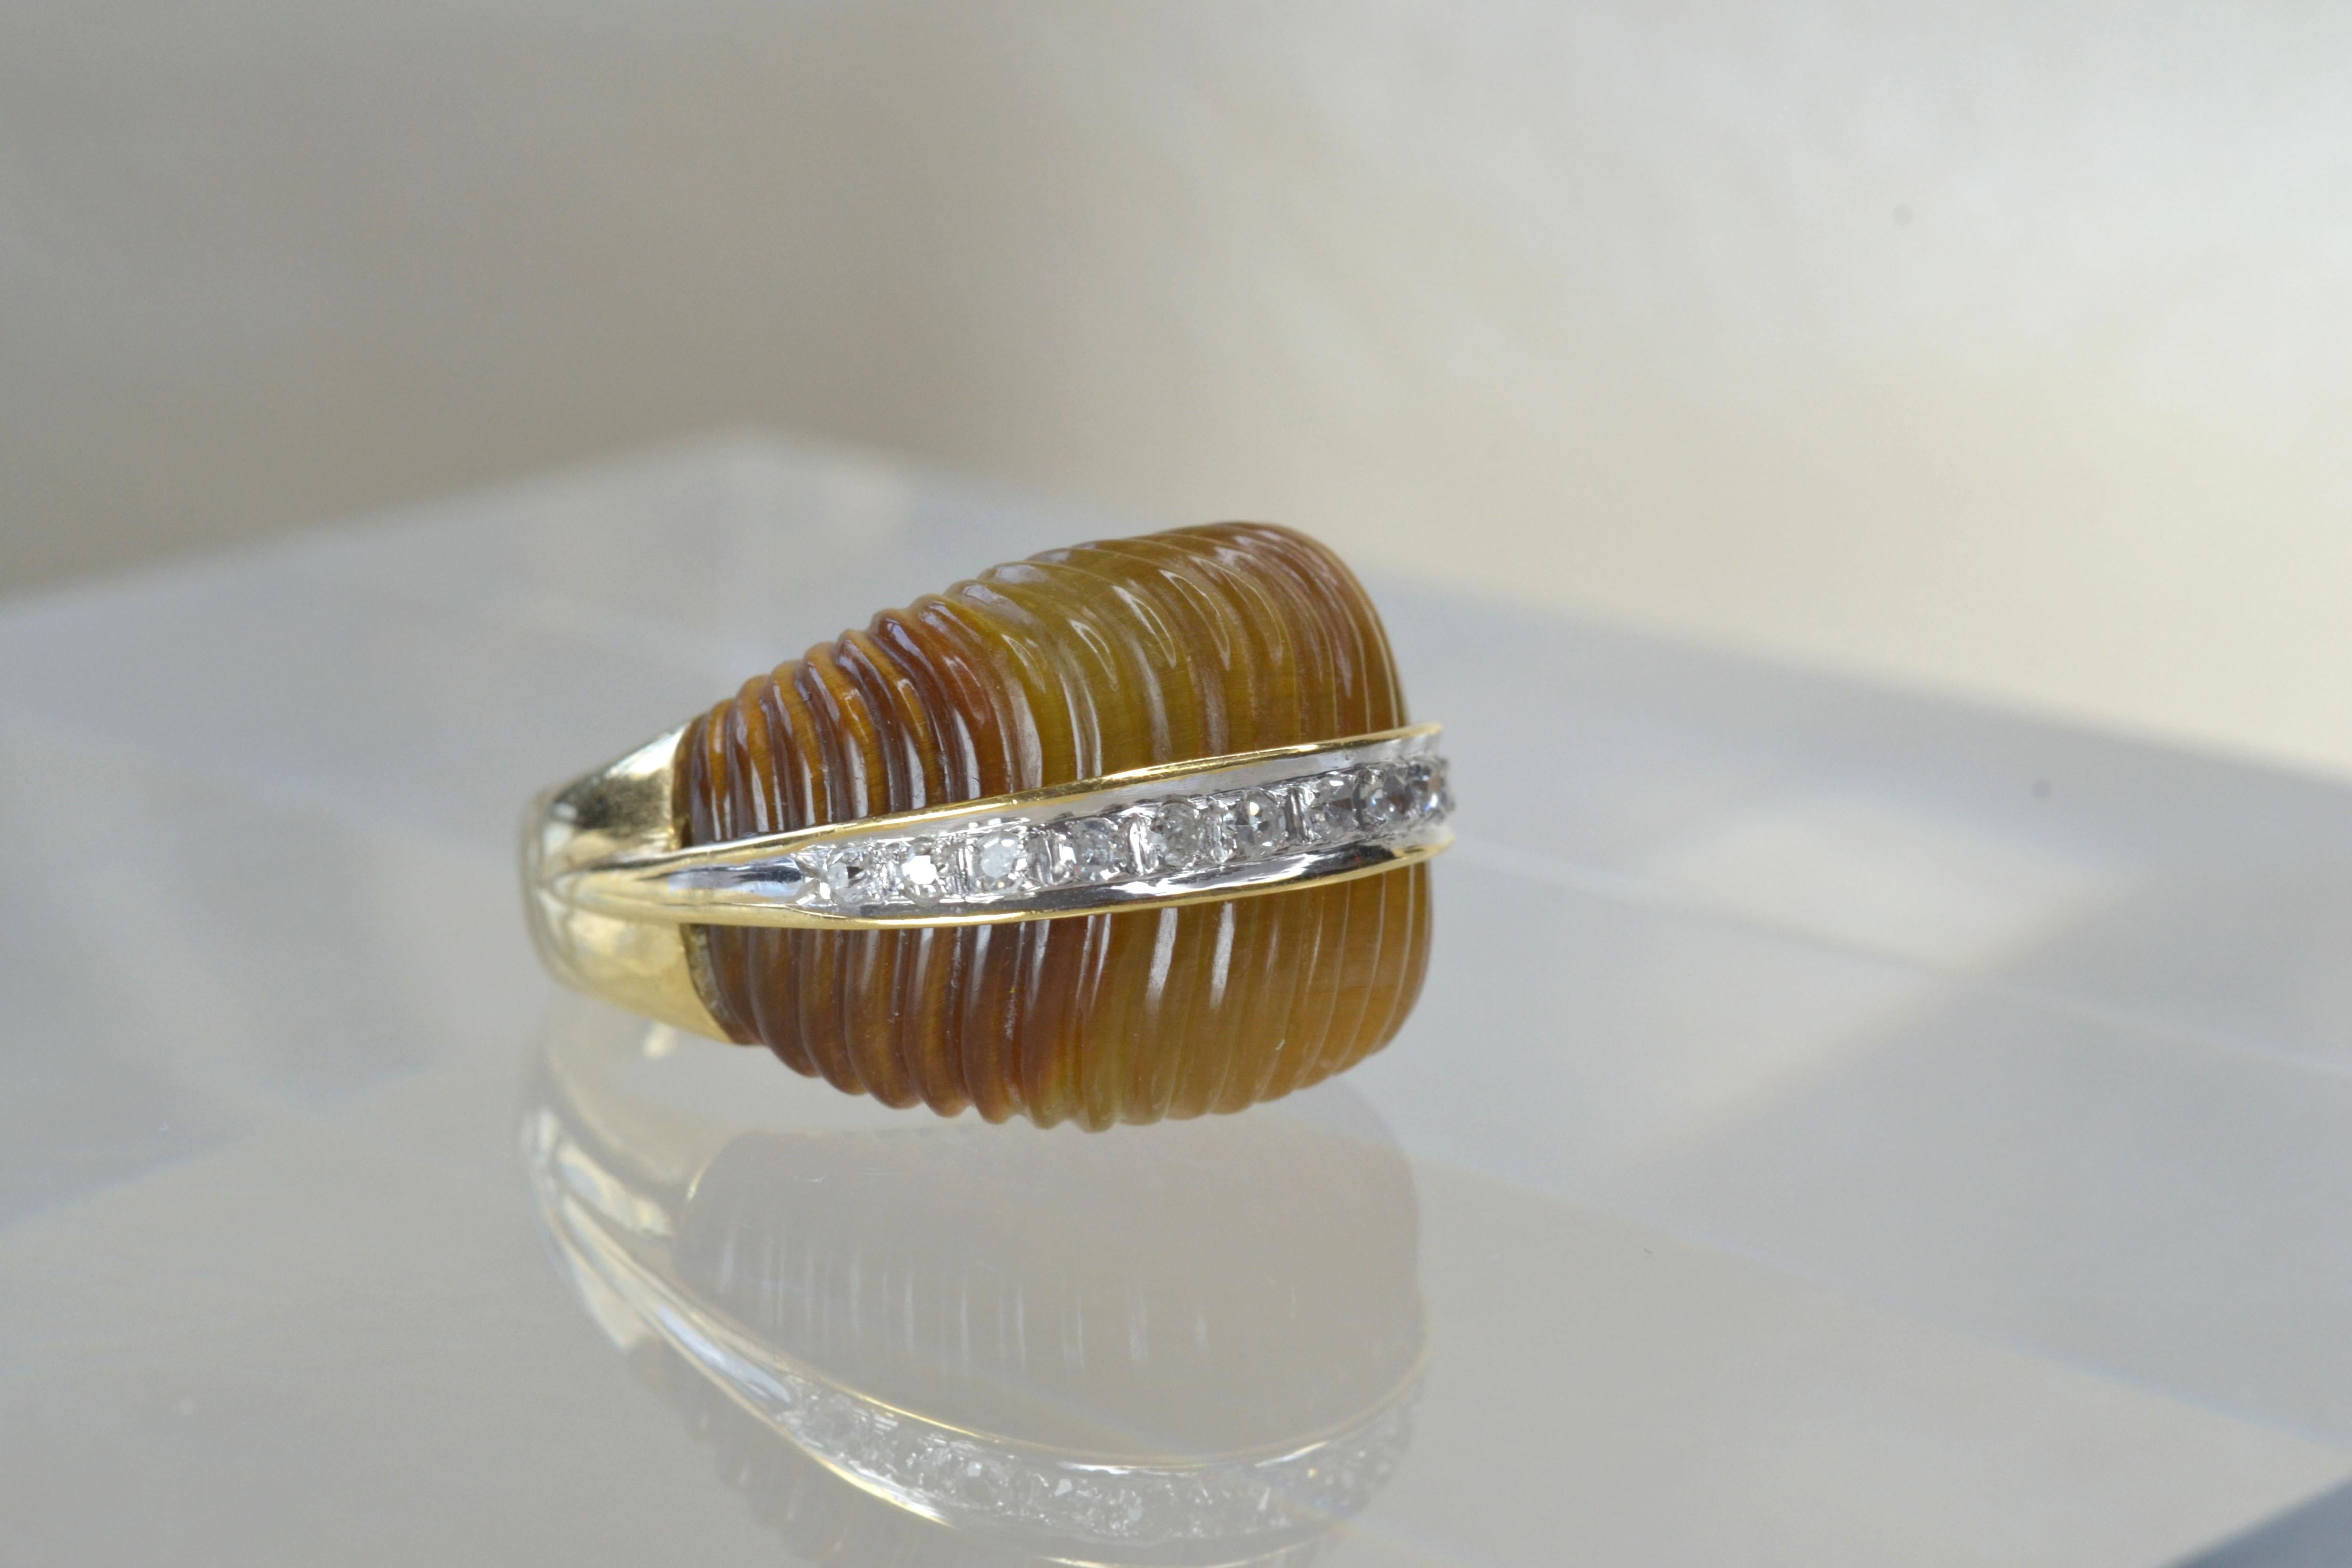 Women's Vintage 14k Gold Tiger's Eye Scalloped Ring One-of-a-kind For Sale